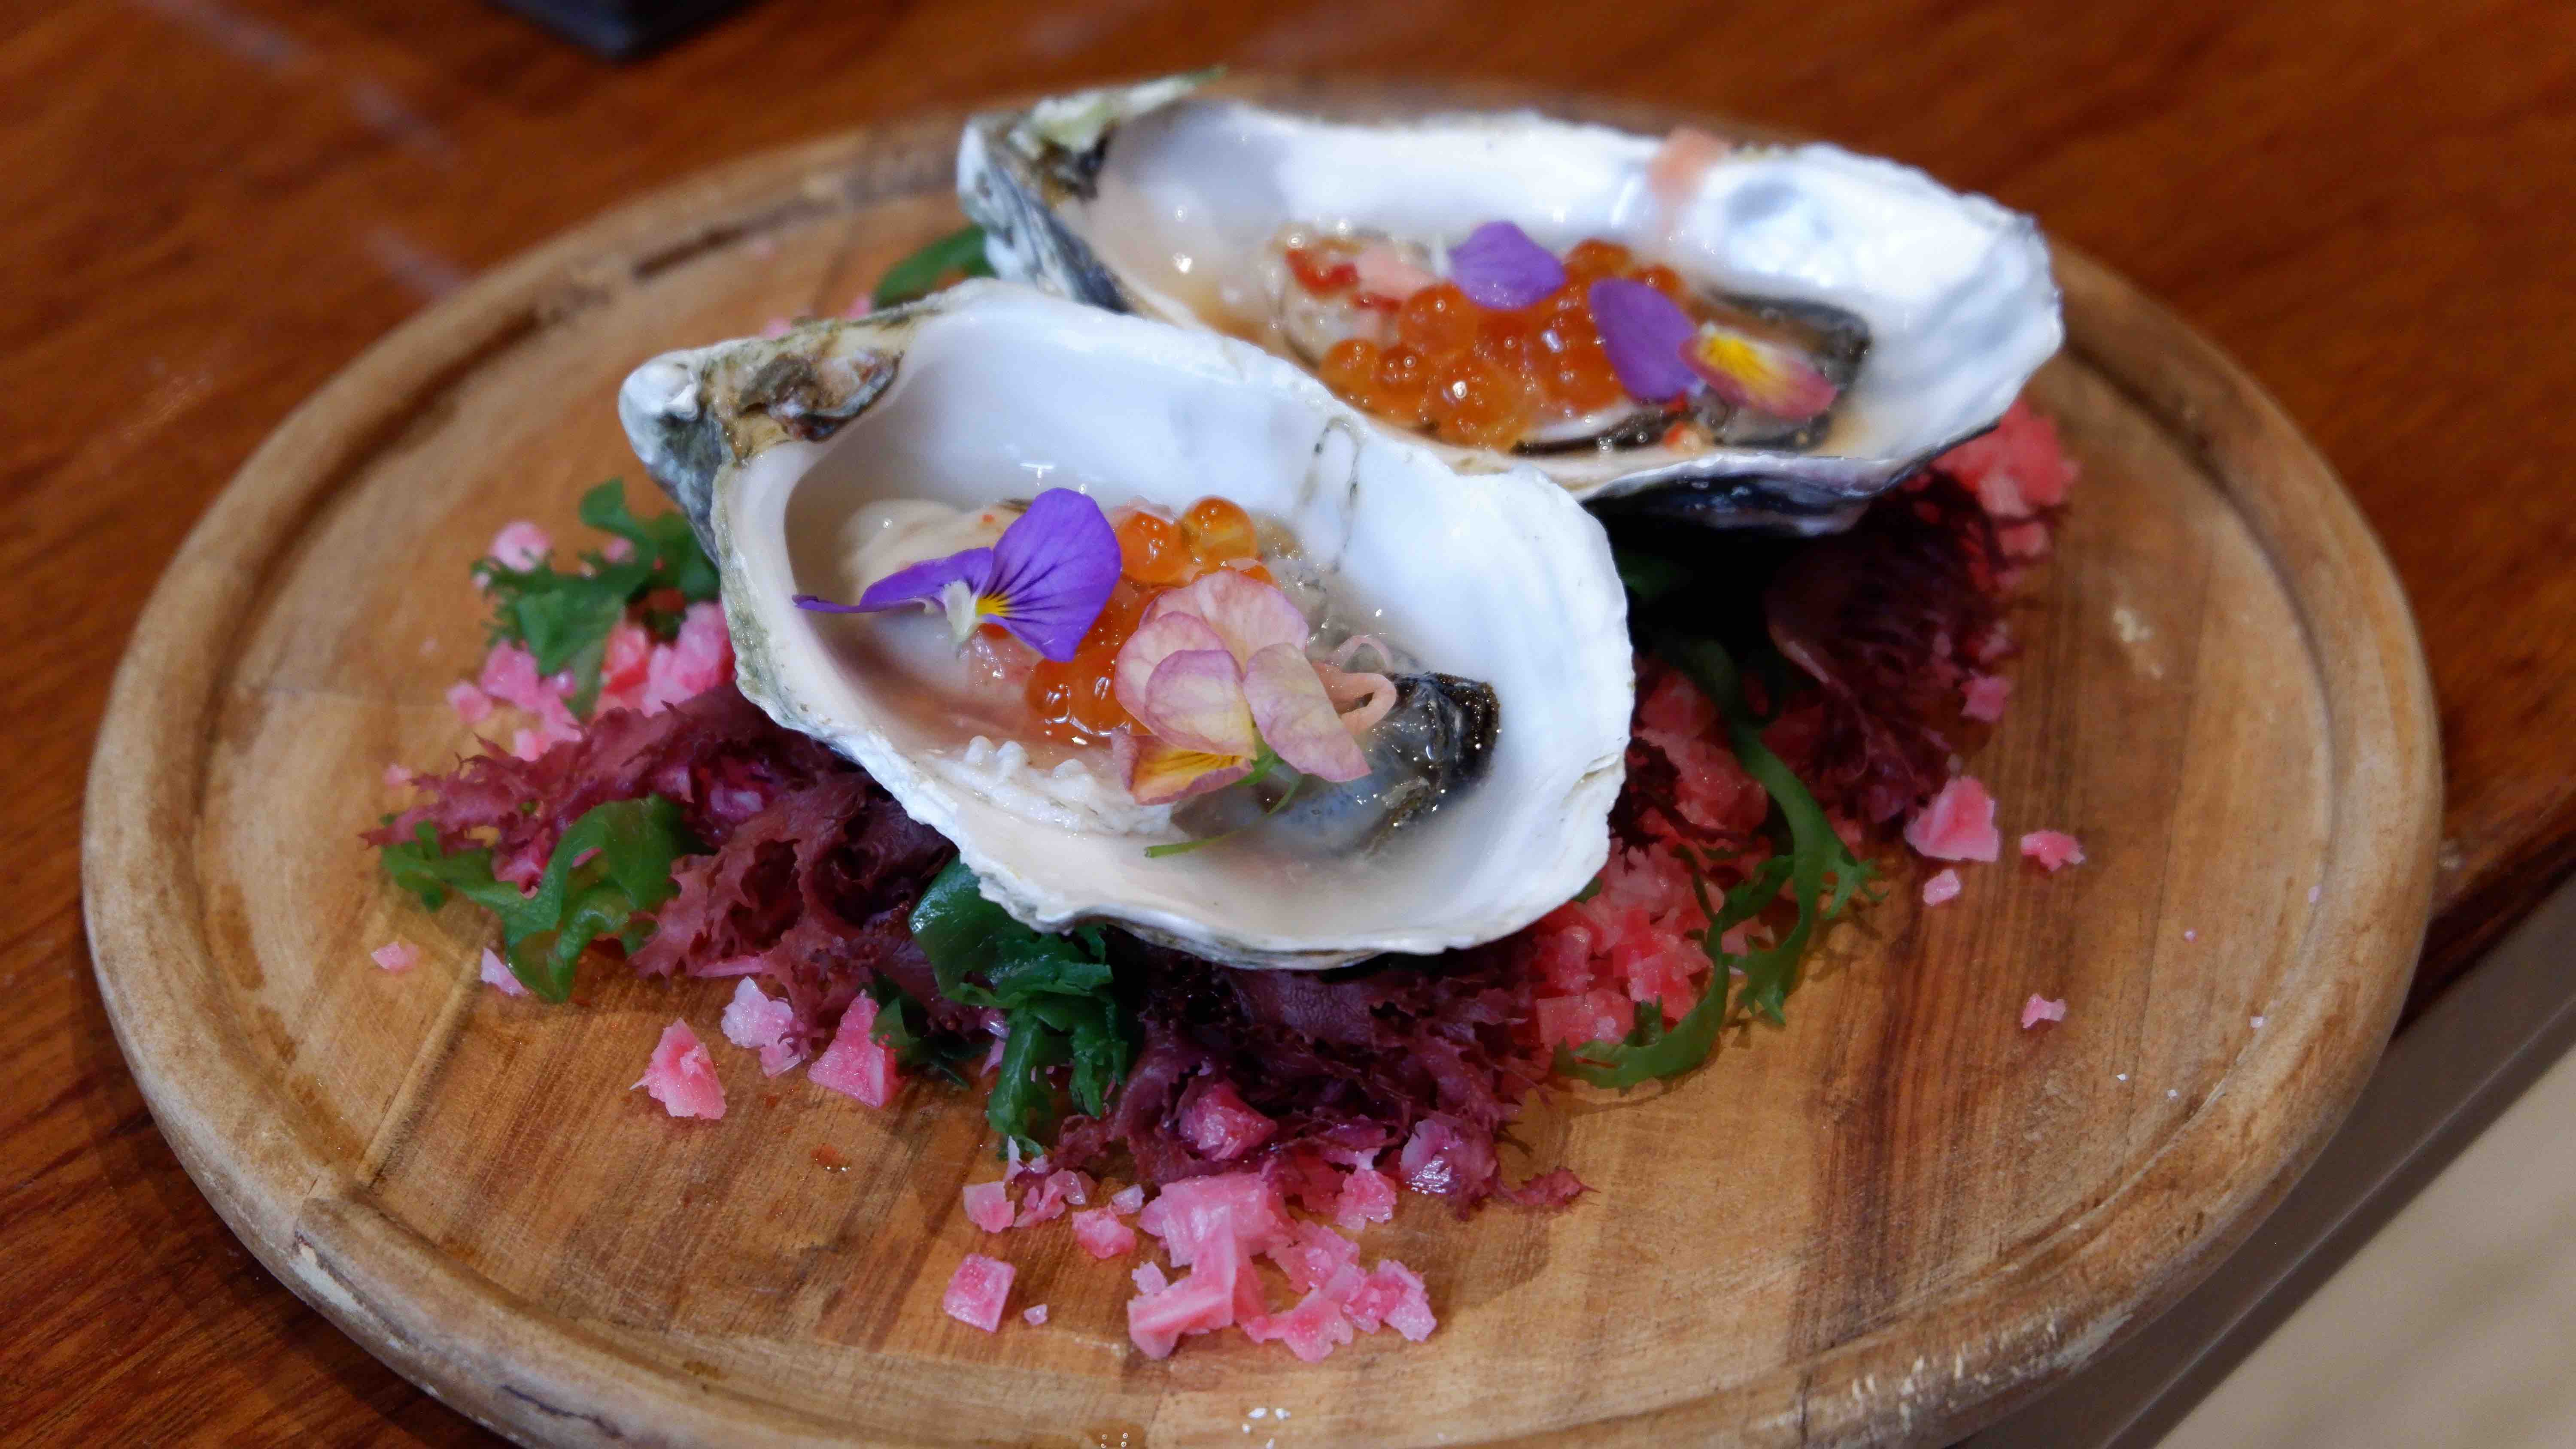 A dish of raw oysters top with salmon roe by chef Luke Nguyen. Photo: Linh To / Tuoi Tre